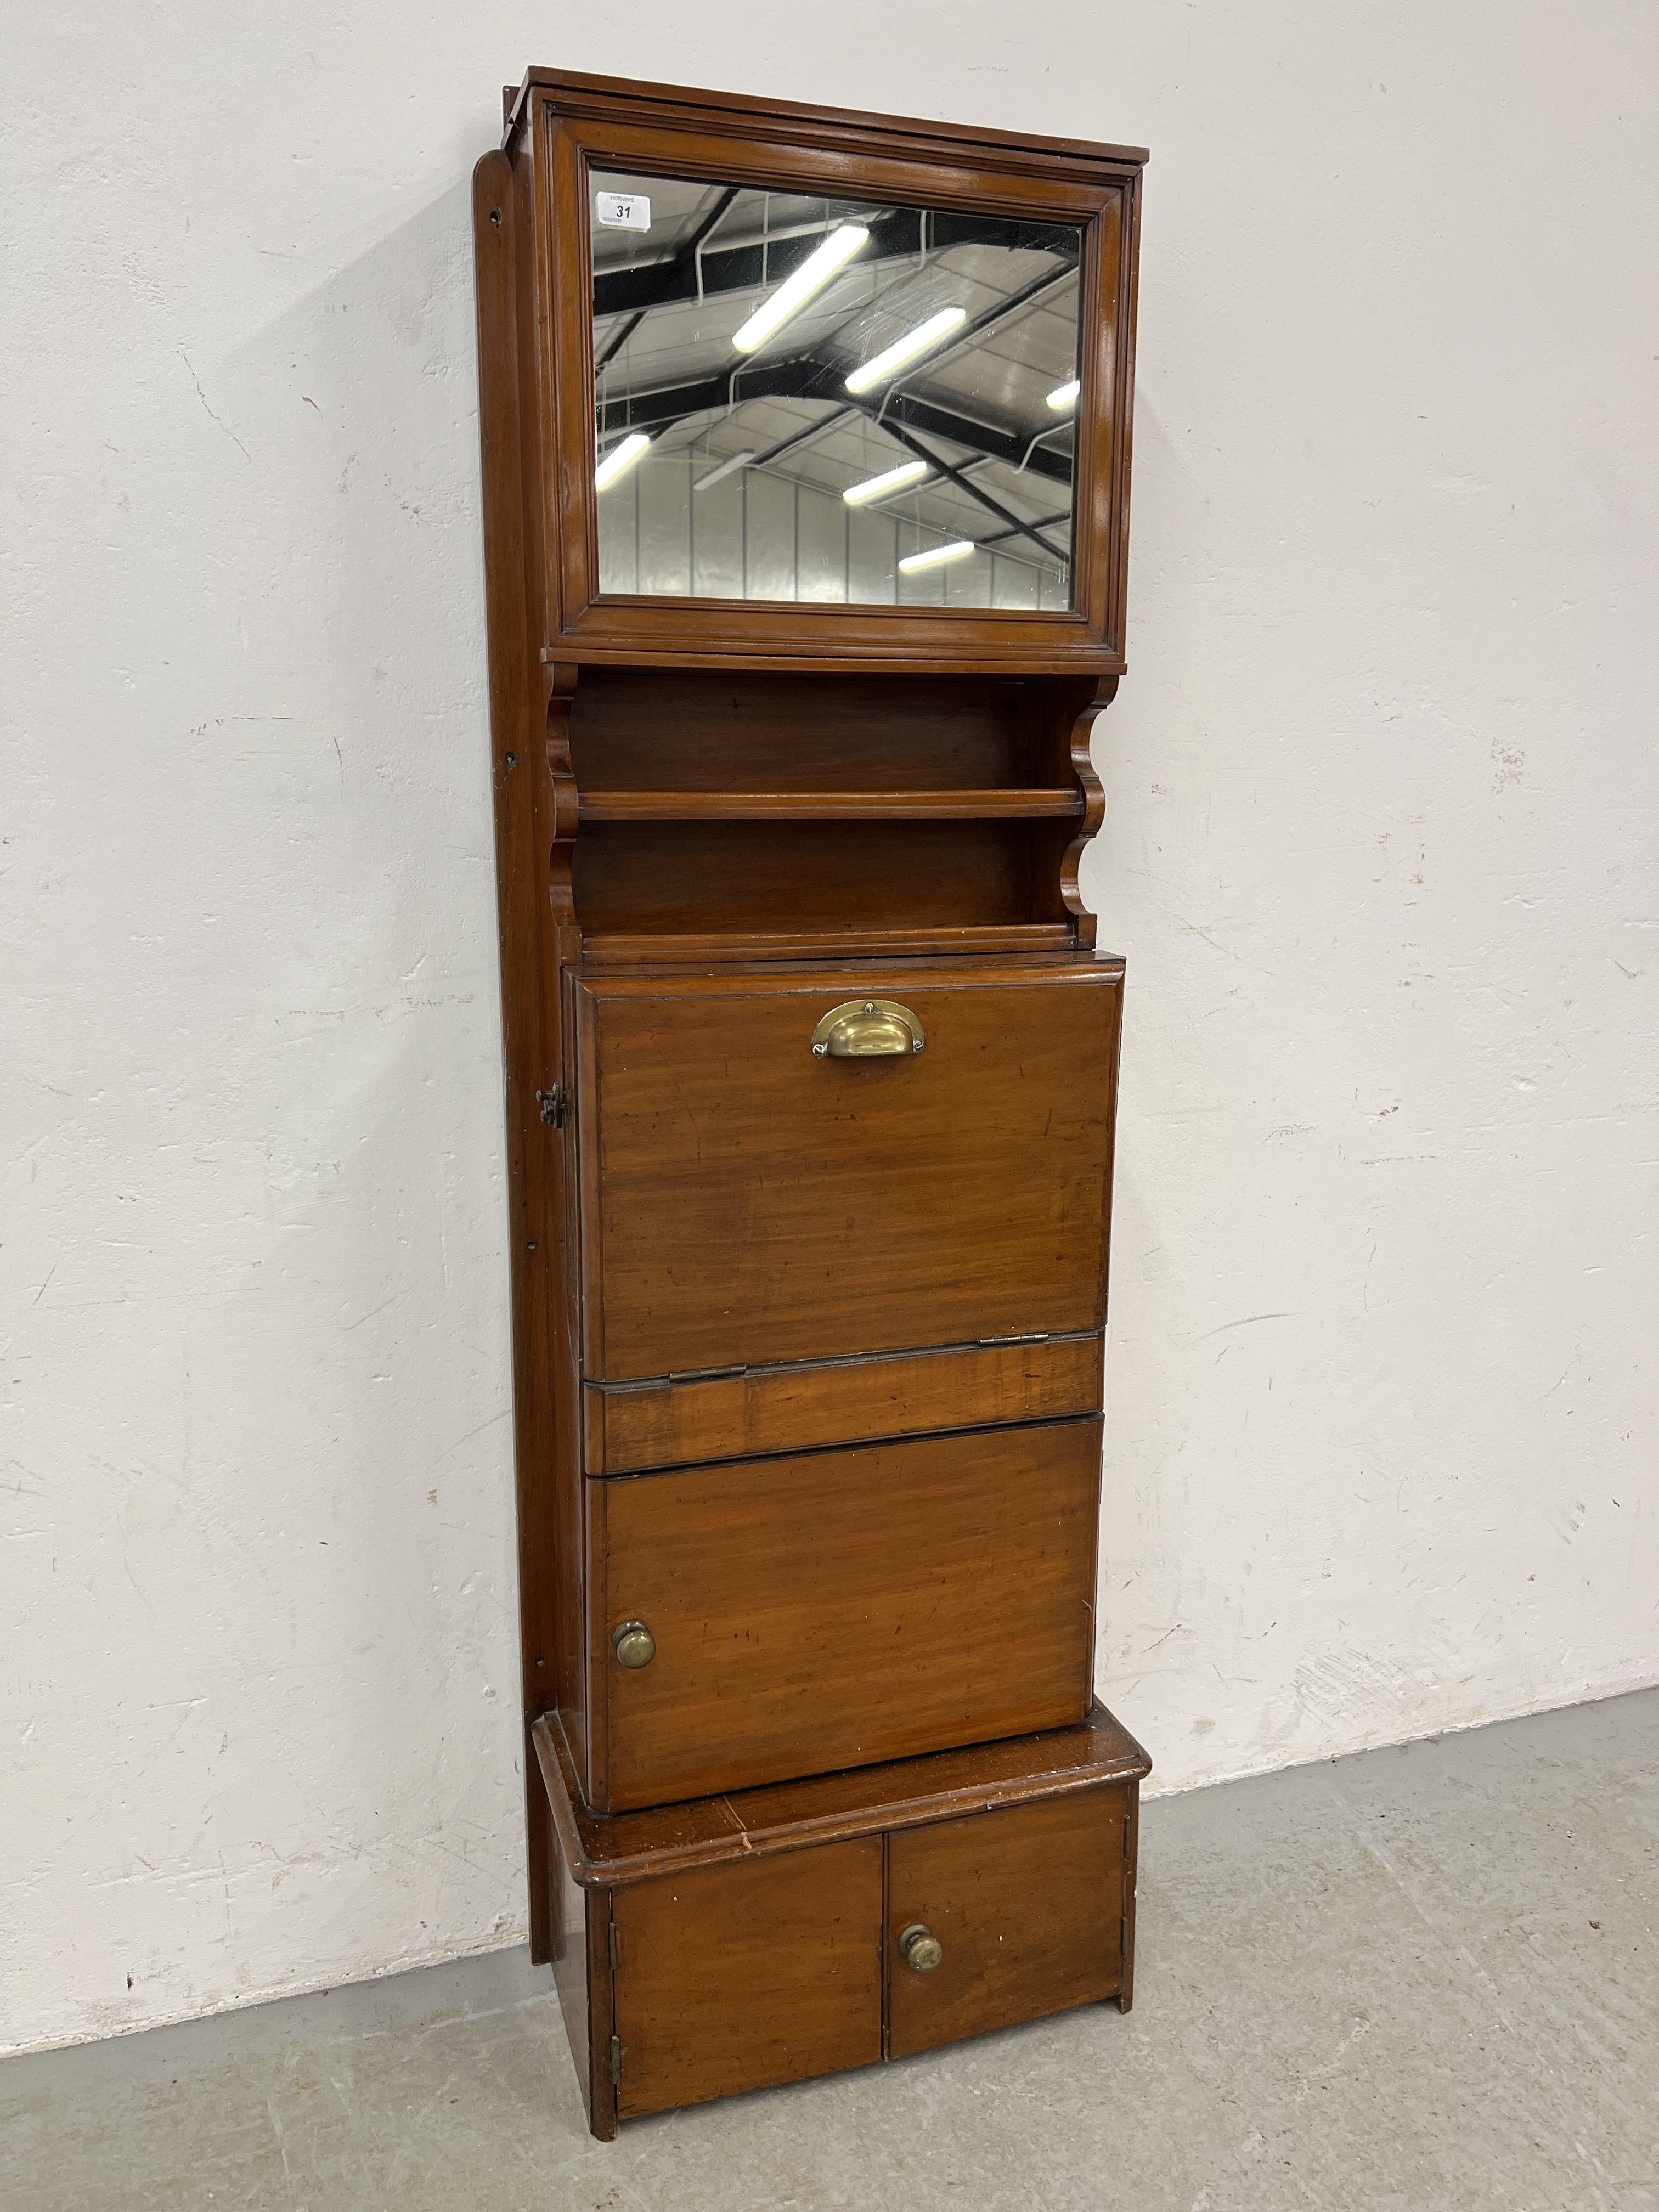 A VICTORIAN MAHOGANY SHIP'S WASH STAND WITH MIRRORED DOOR ABOVE - W 54CM X D 29CM X H 164CM.